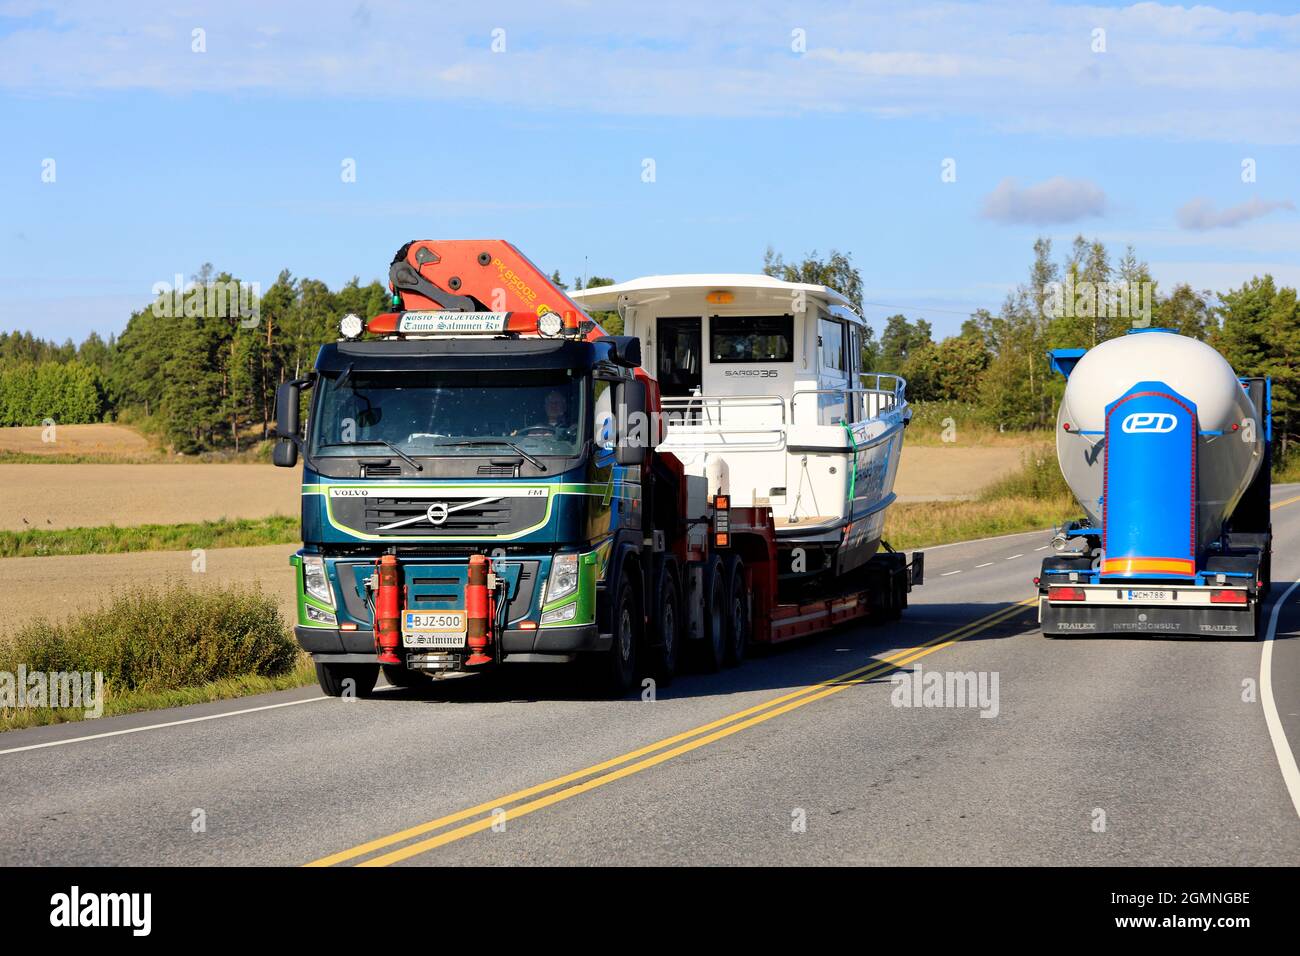 Green Volvo FM semi trailer transports recreational boat as oversize load, tank truck drives in opposite direction. Salo, Finland. September 9, 2021 Stock Photo